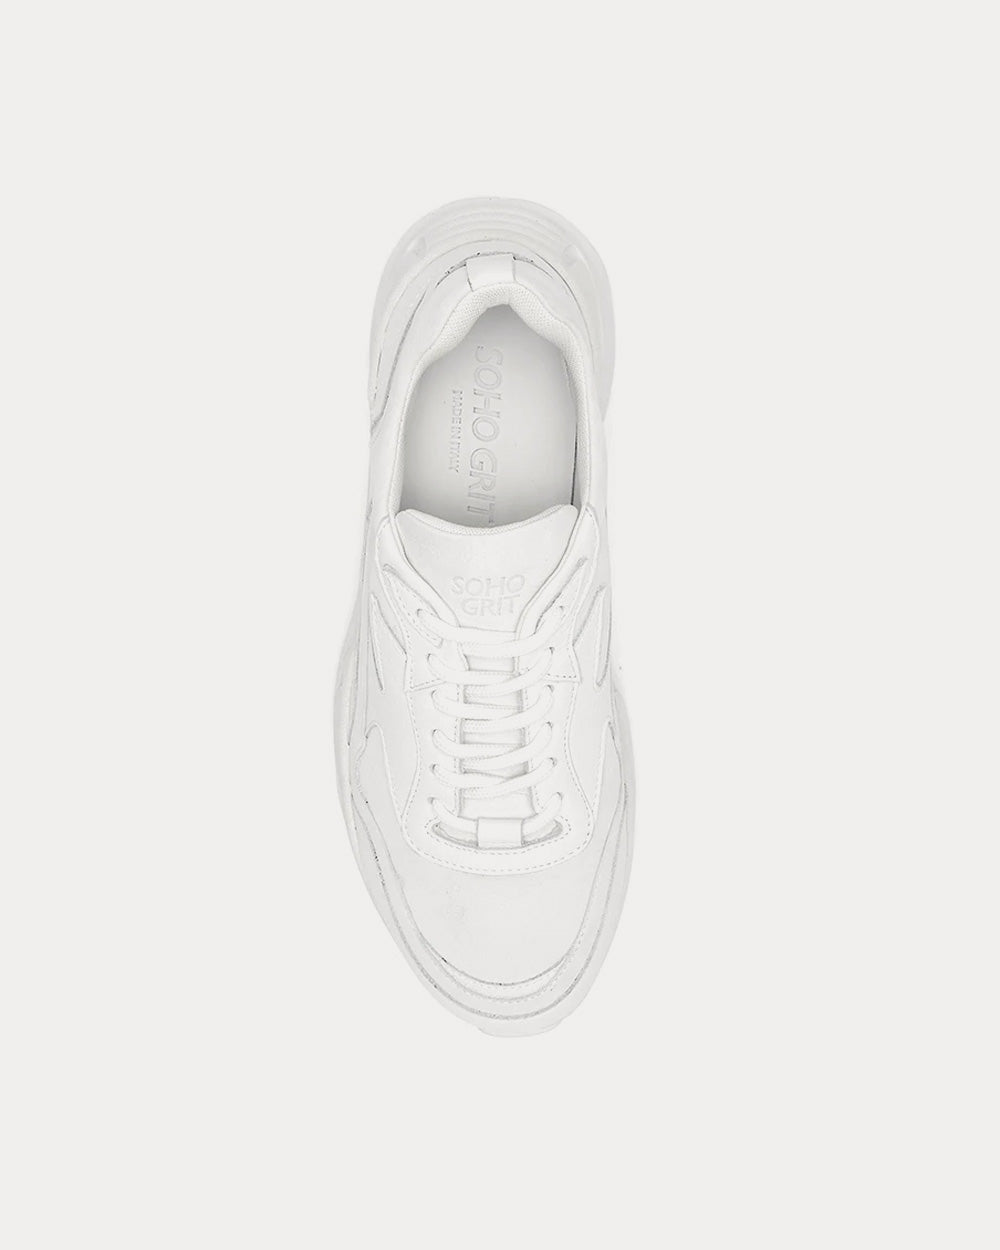 Soho Grit - The Hollen White Low Top Sneakers